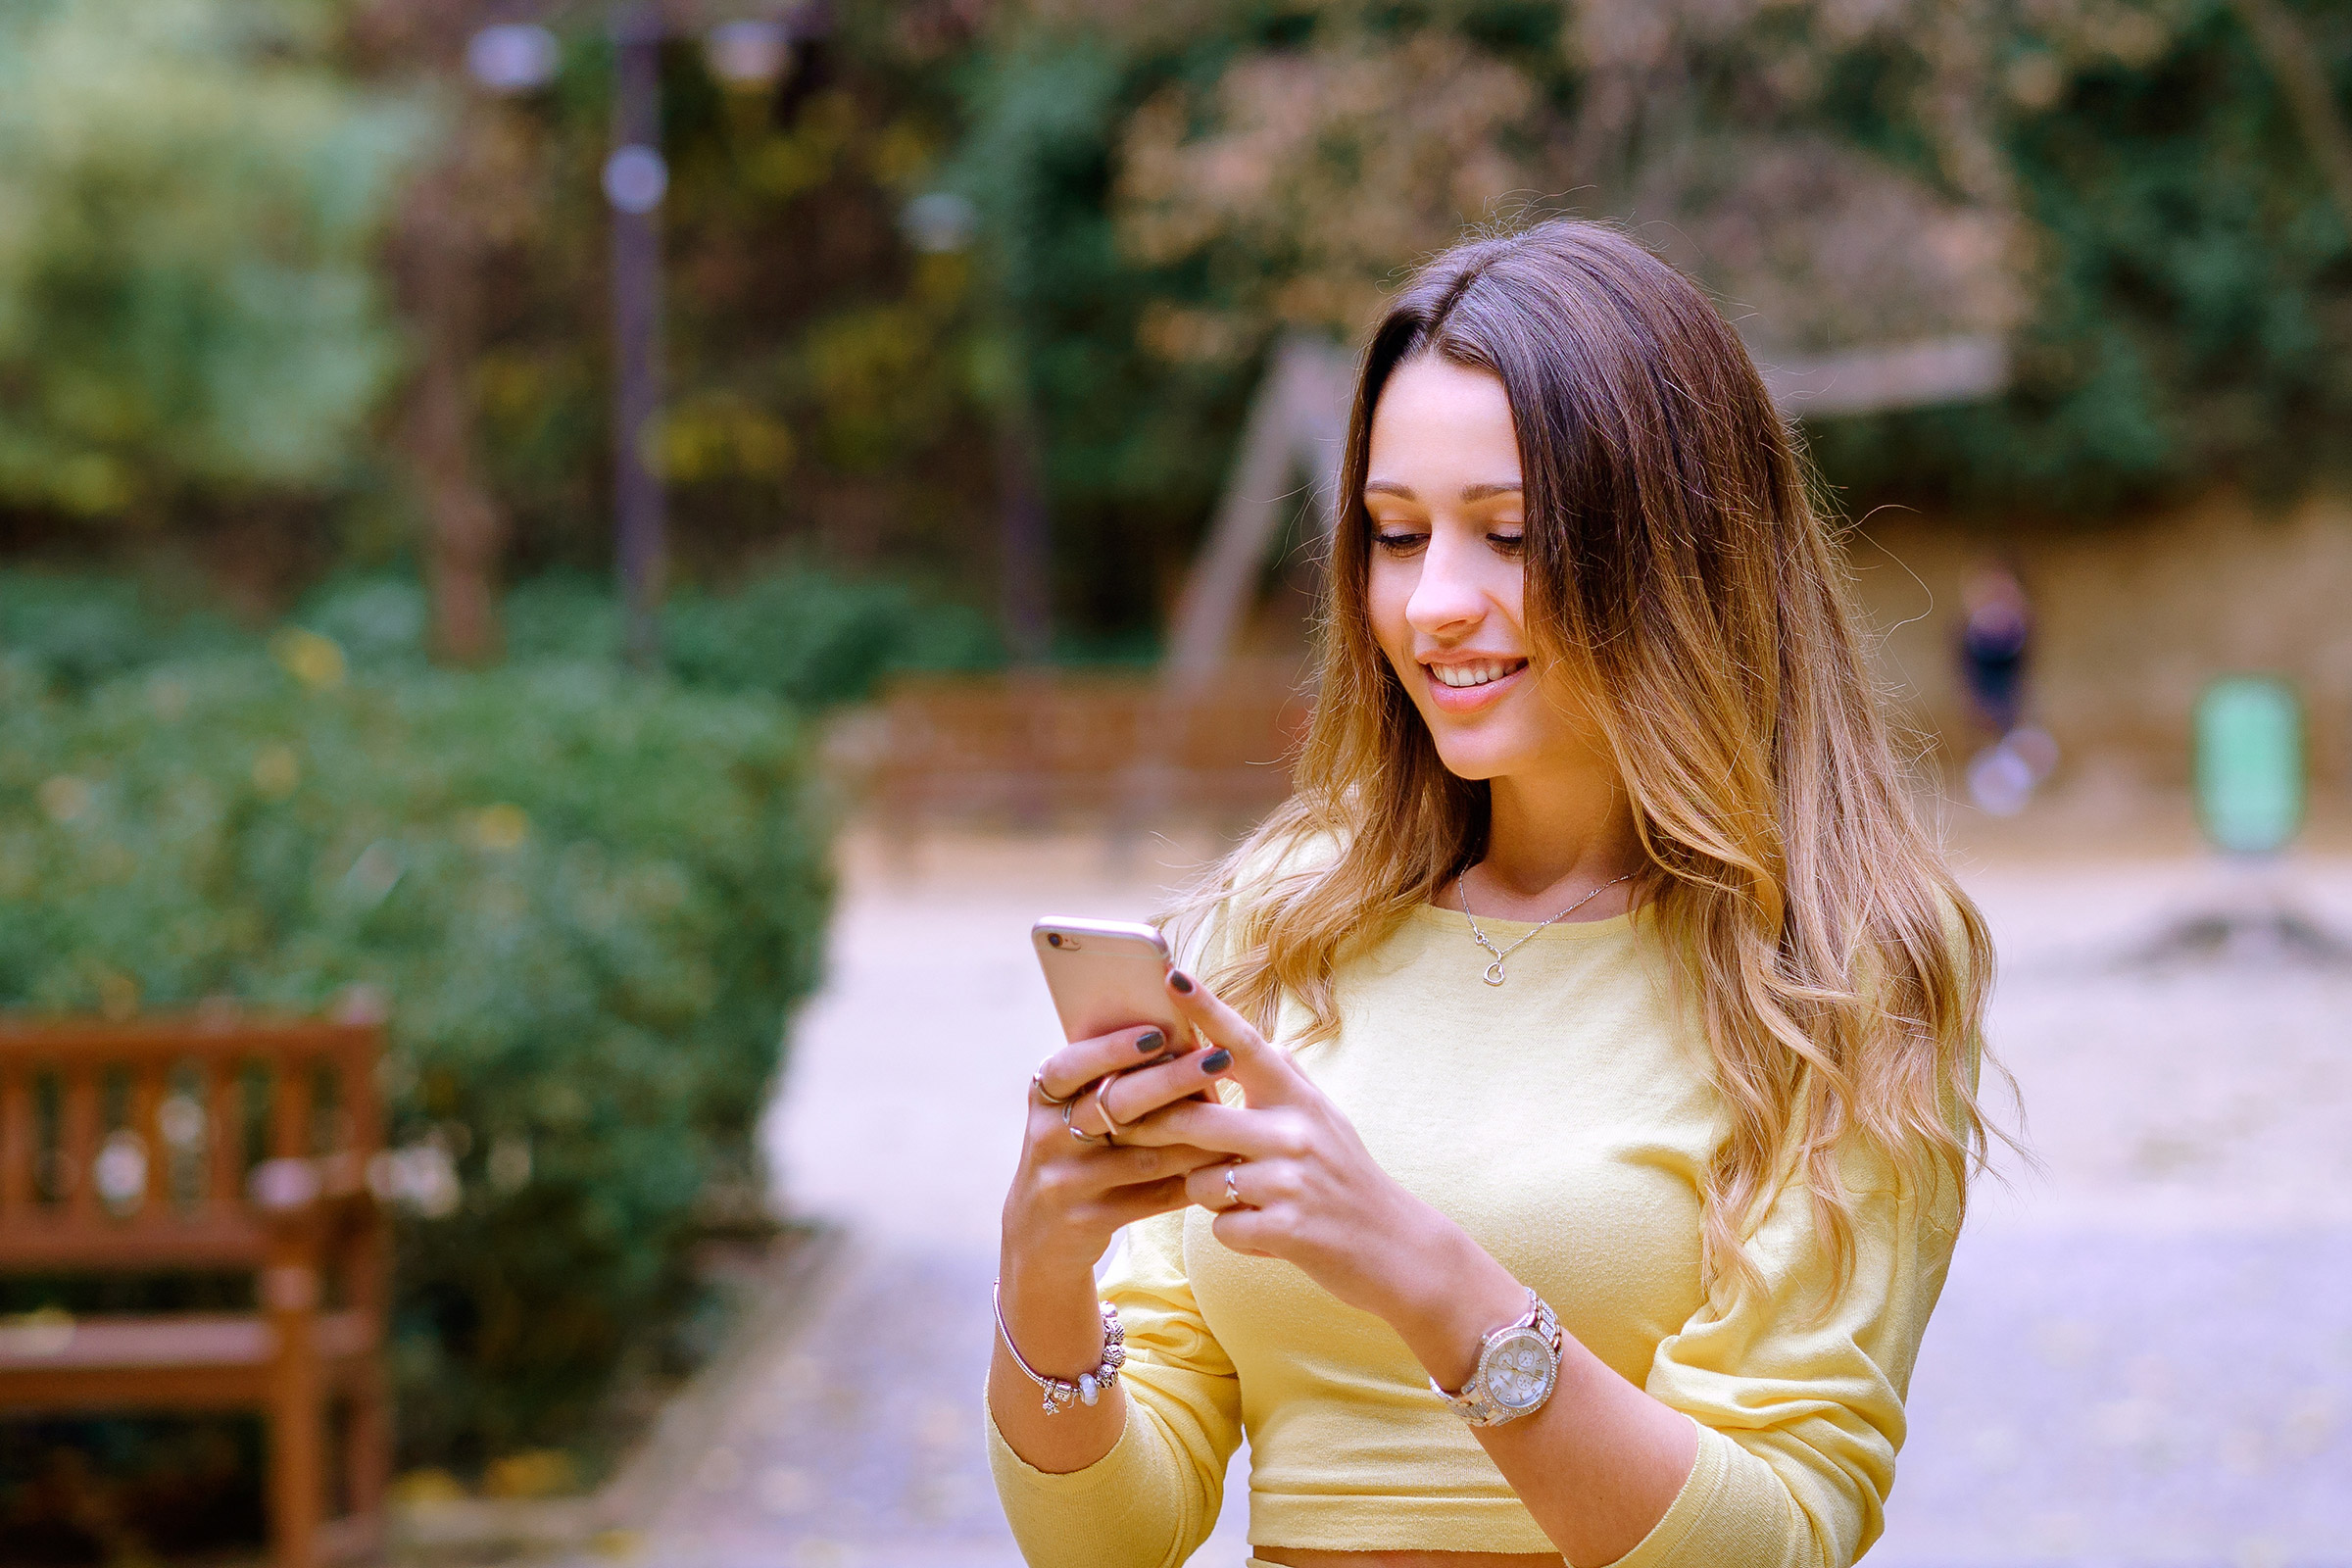 Young woman looking at her phone smiling